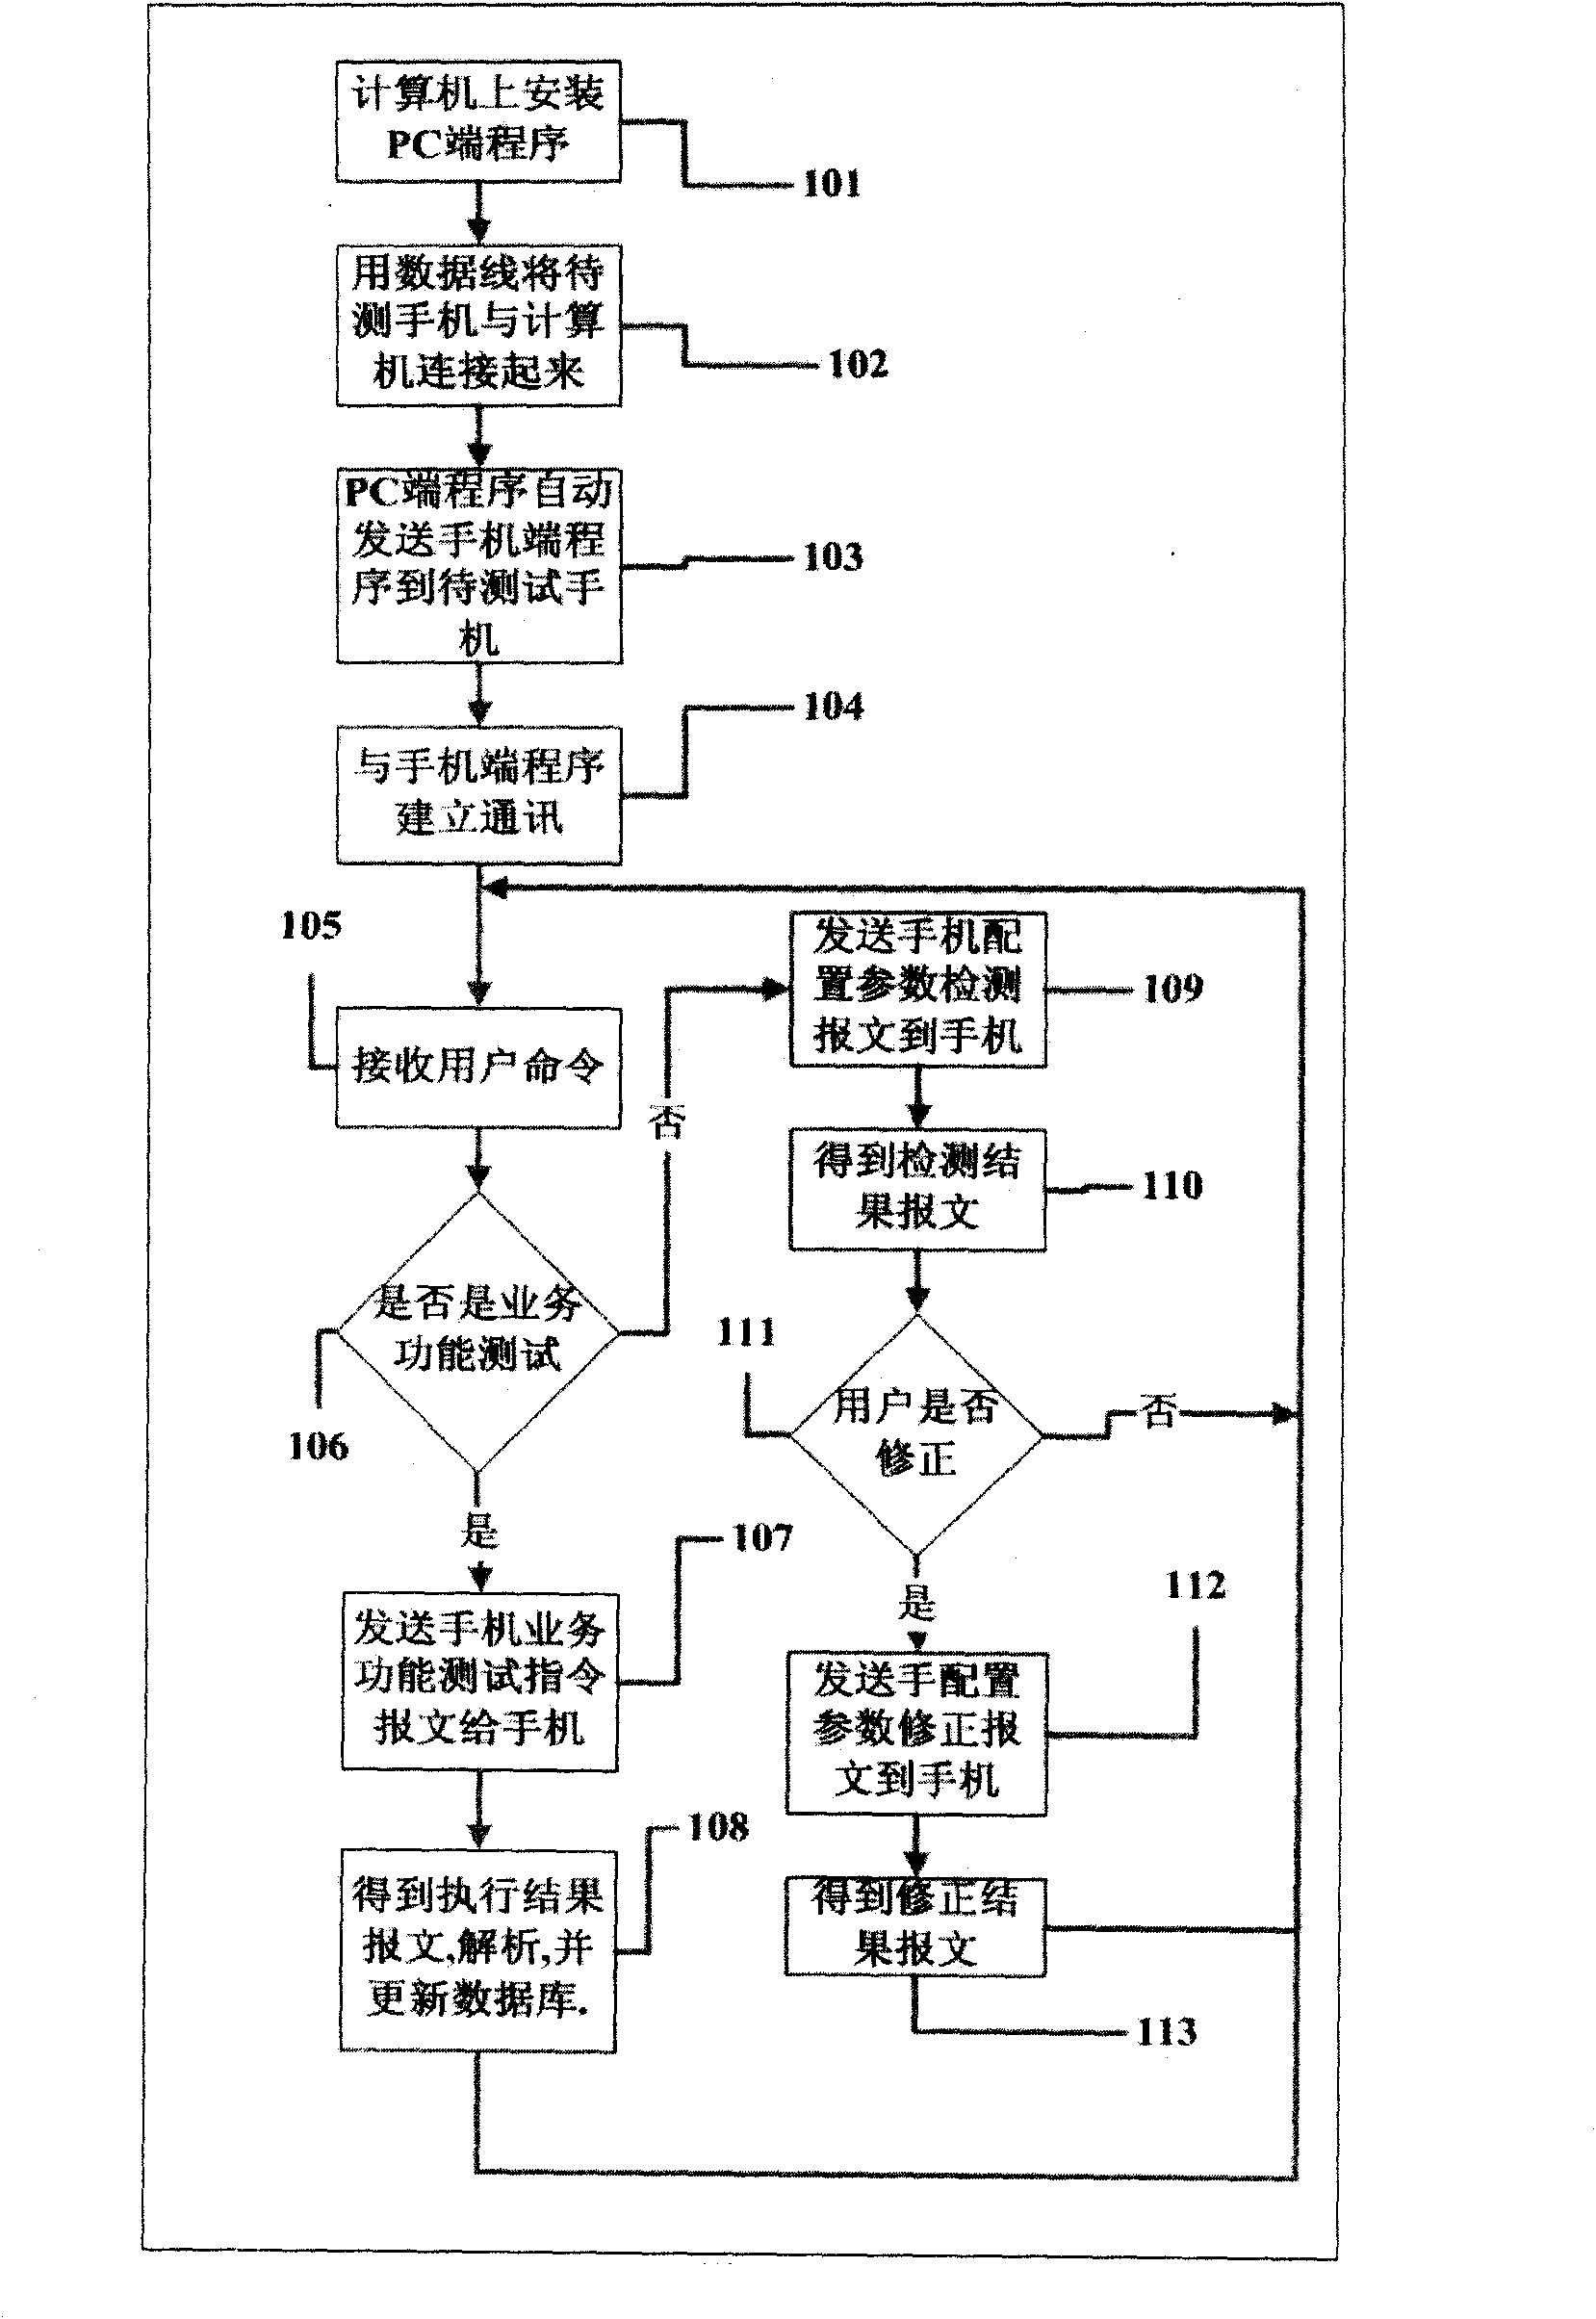 Automatic end-user oriented testing method for mobile phone